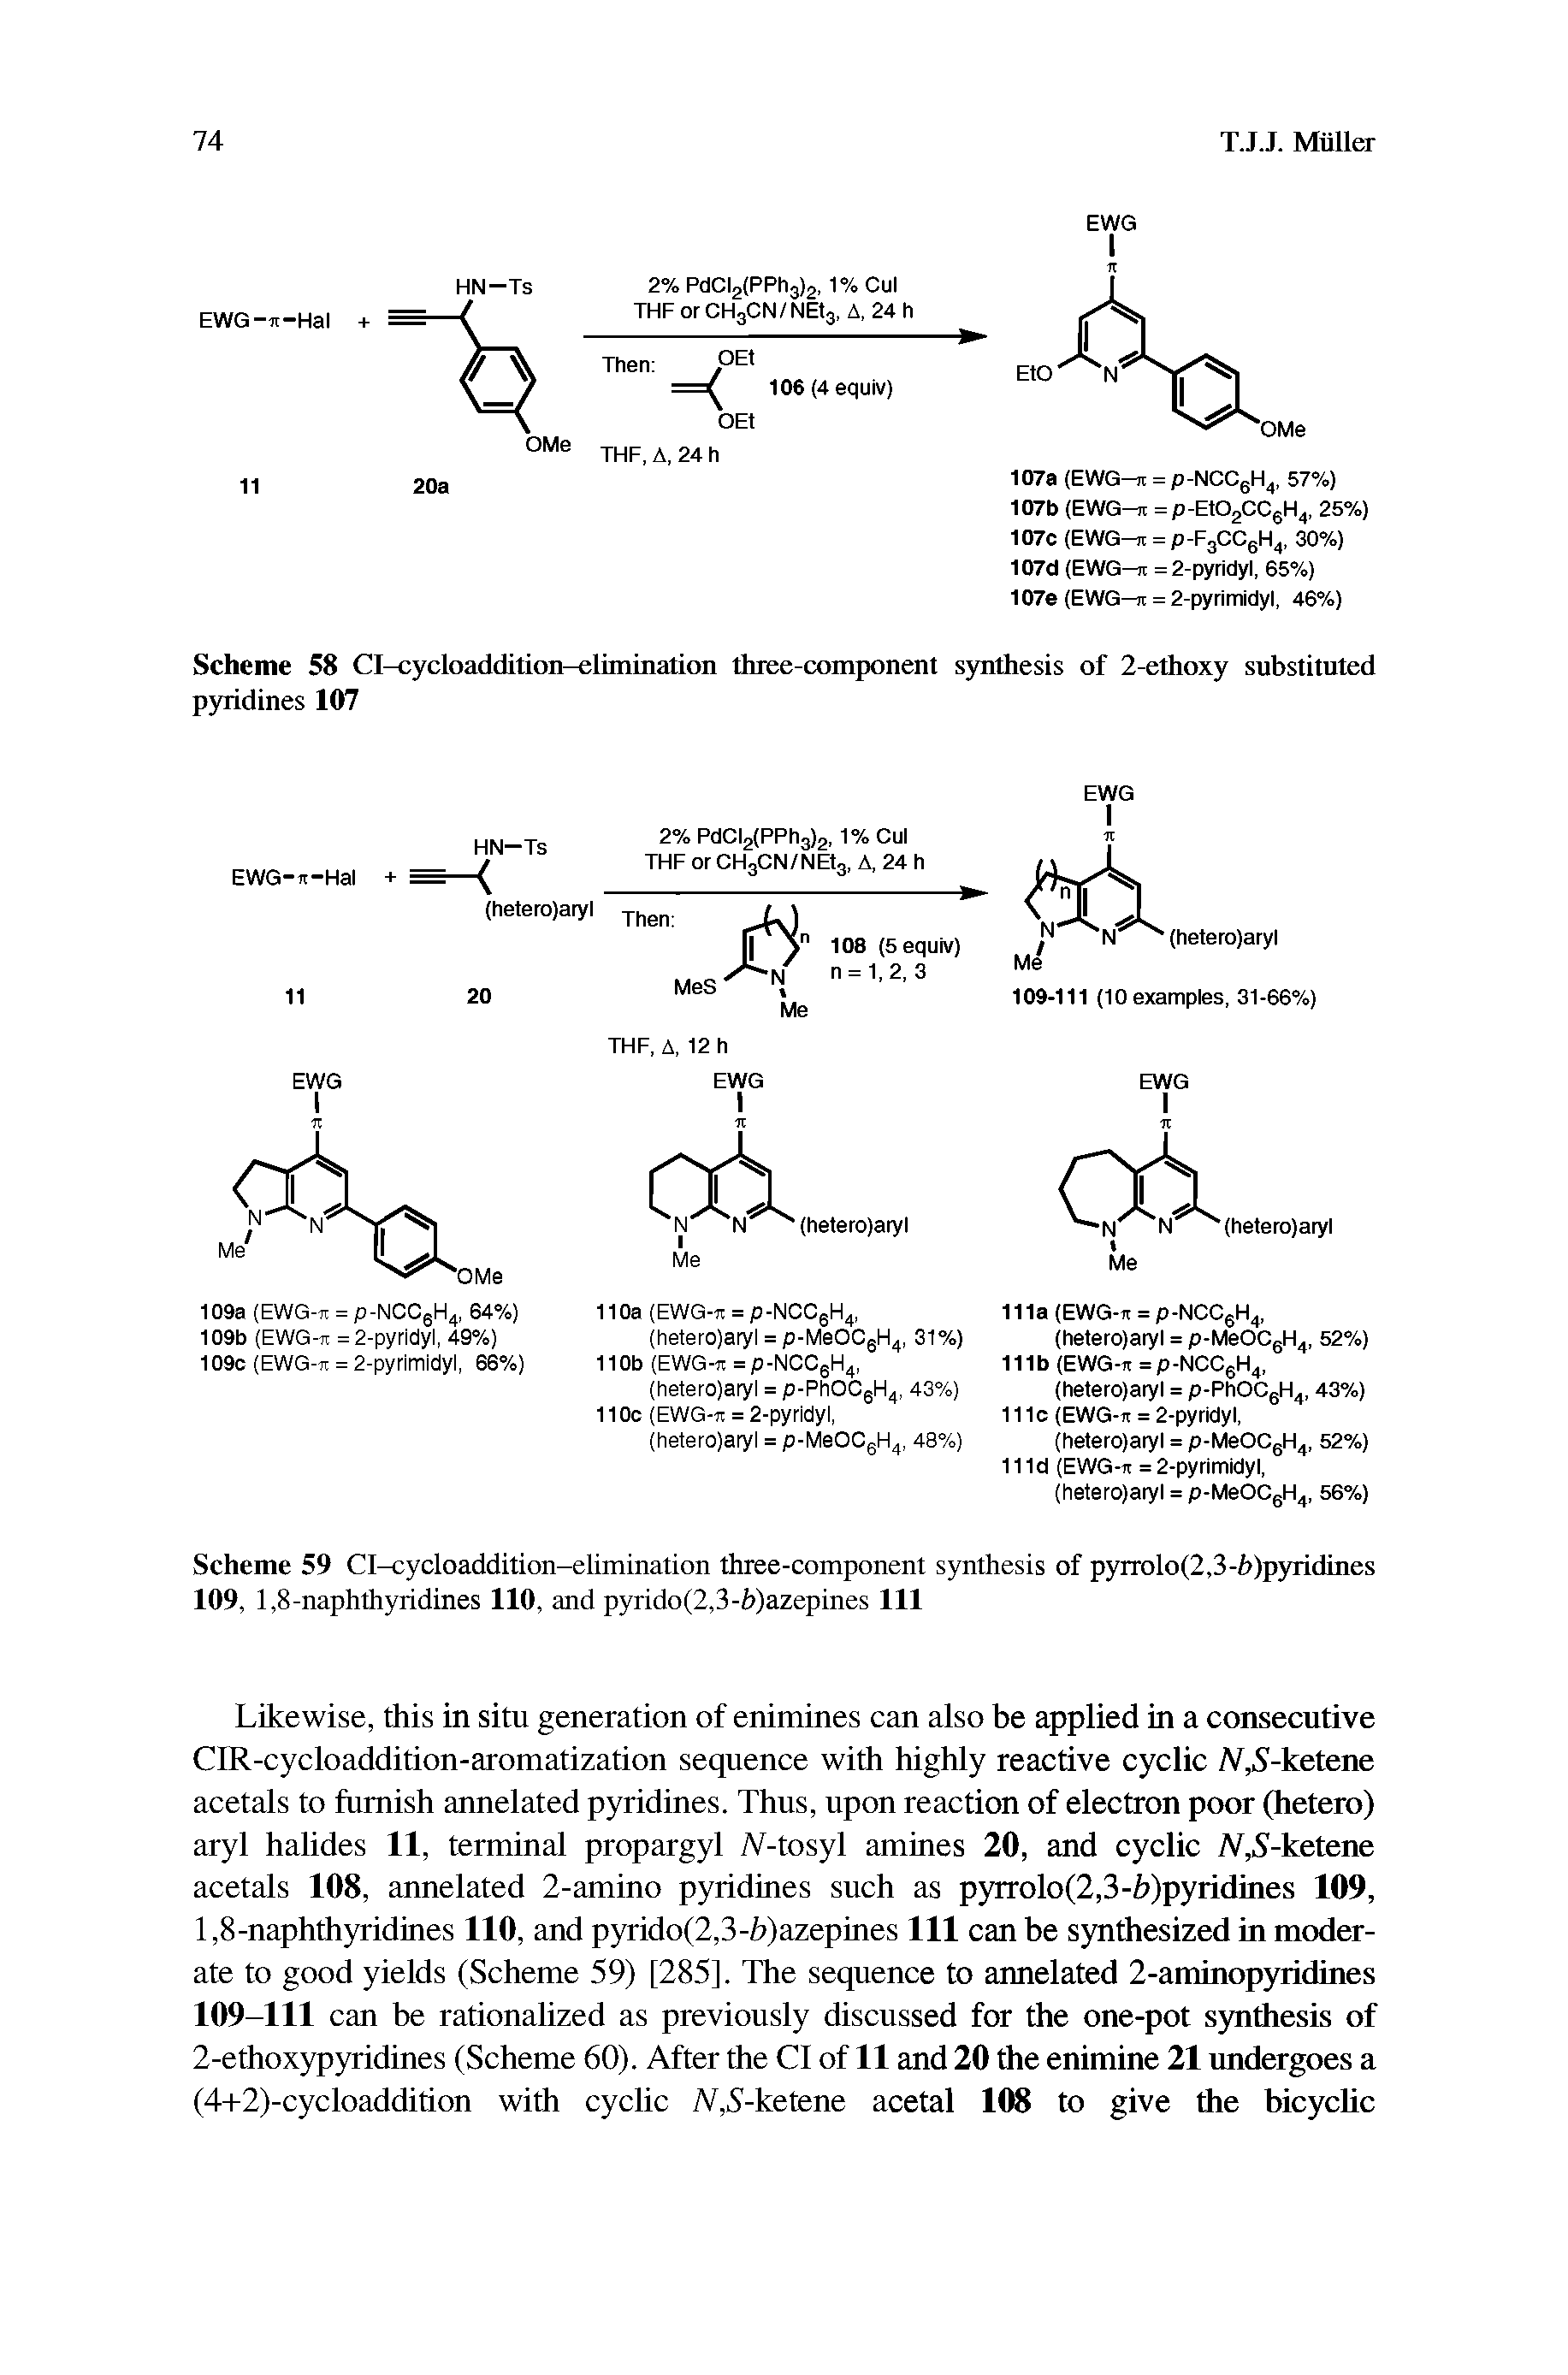 Scheme 58 Cl-cycloaddition-elimination three-component s)mthesis of 2-ethoxy substituted P)mdines 107...